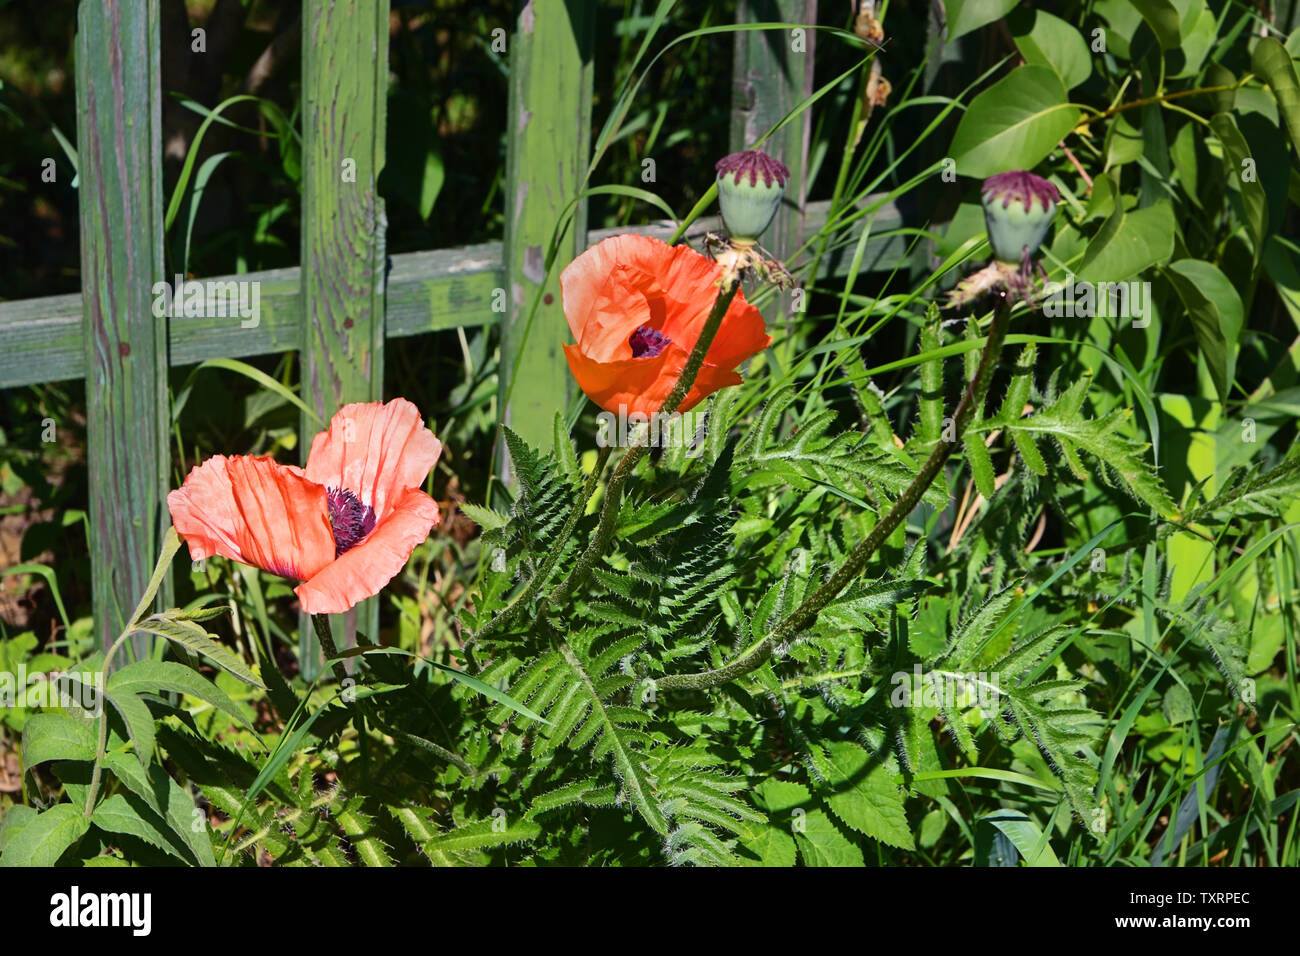 Poppy grows in grass nearly wooden fence Stock Photo